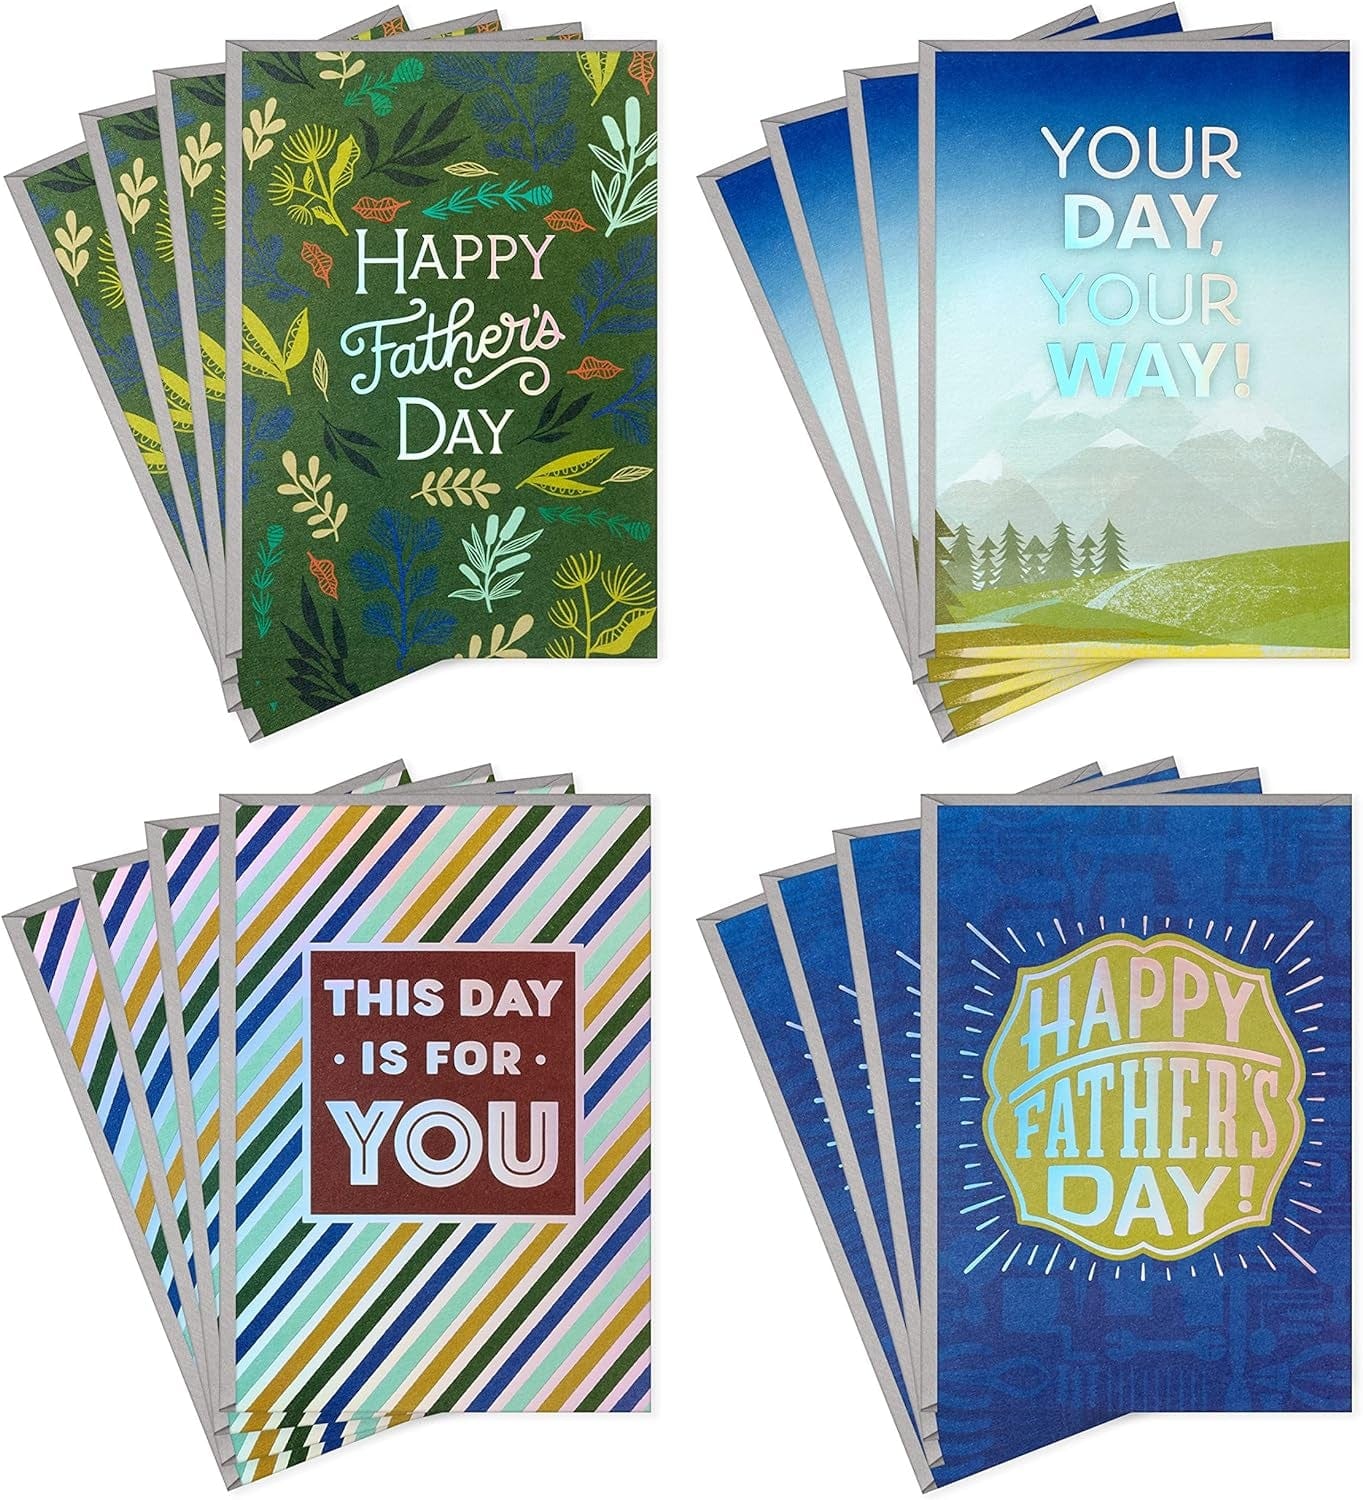 GeckoCustom Father'S Day Cards Assortment, Tools and Outdoors (16 Cards with Envelopes)